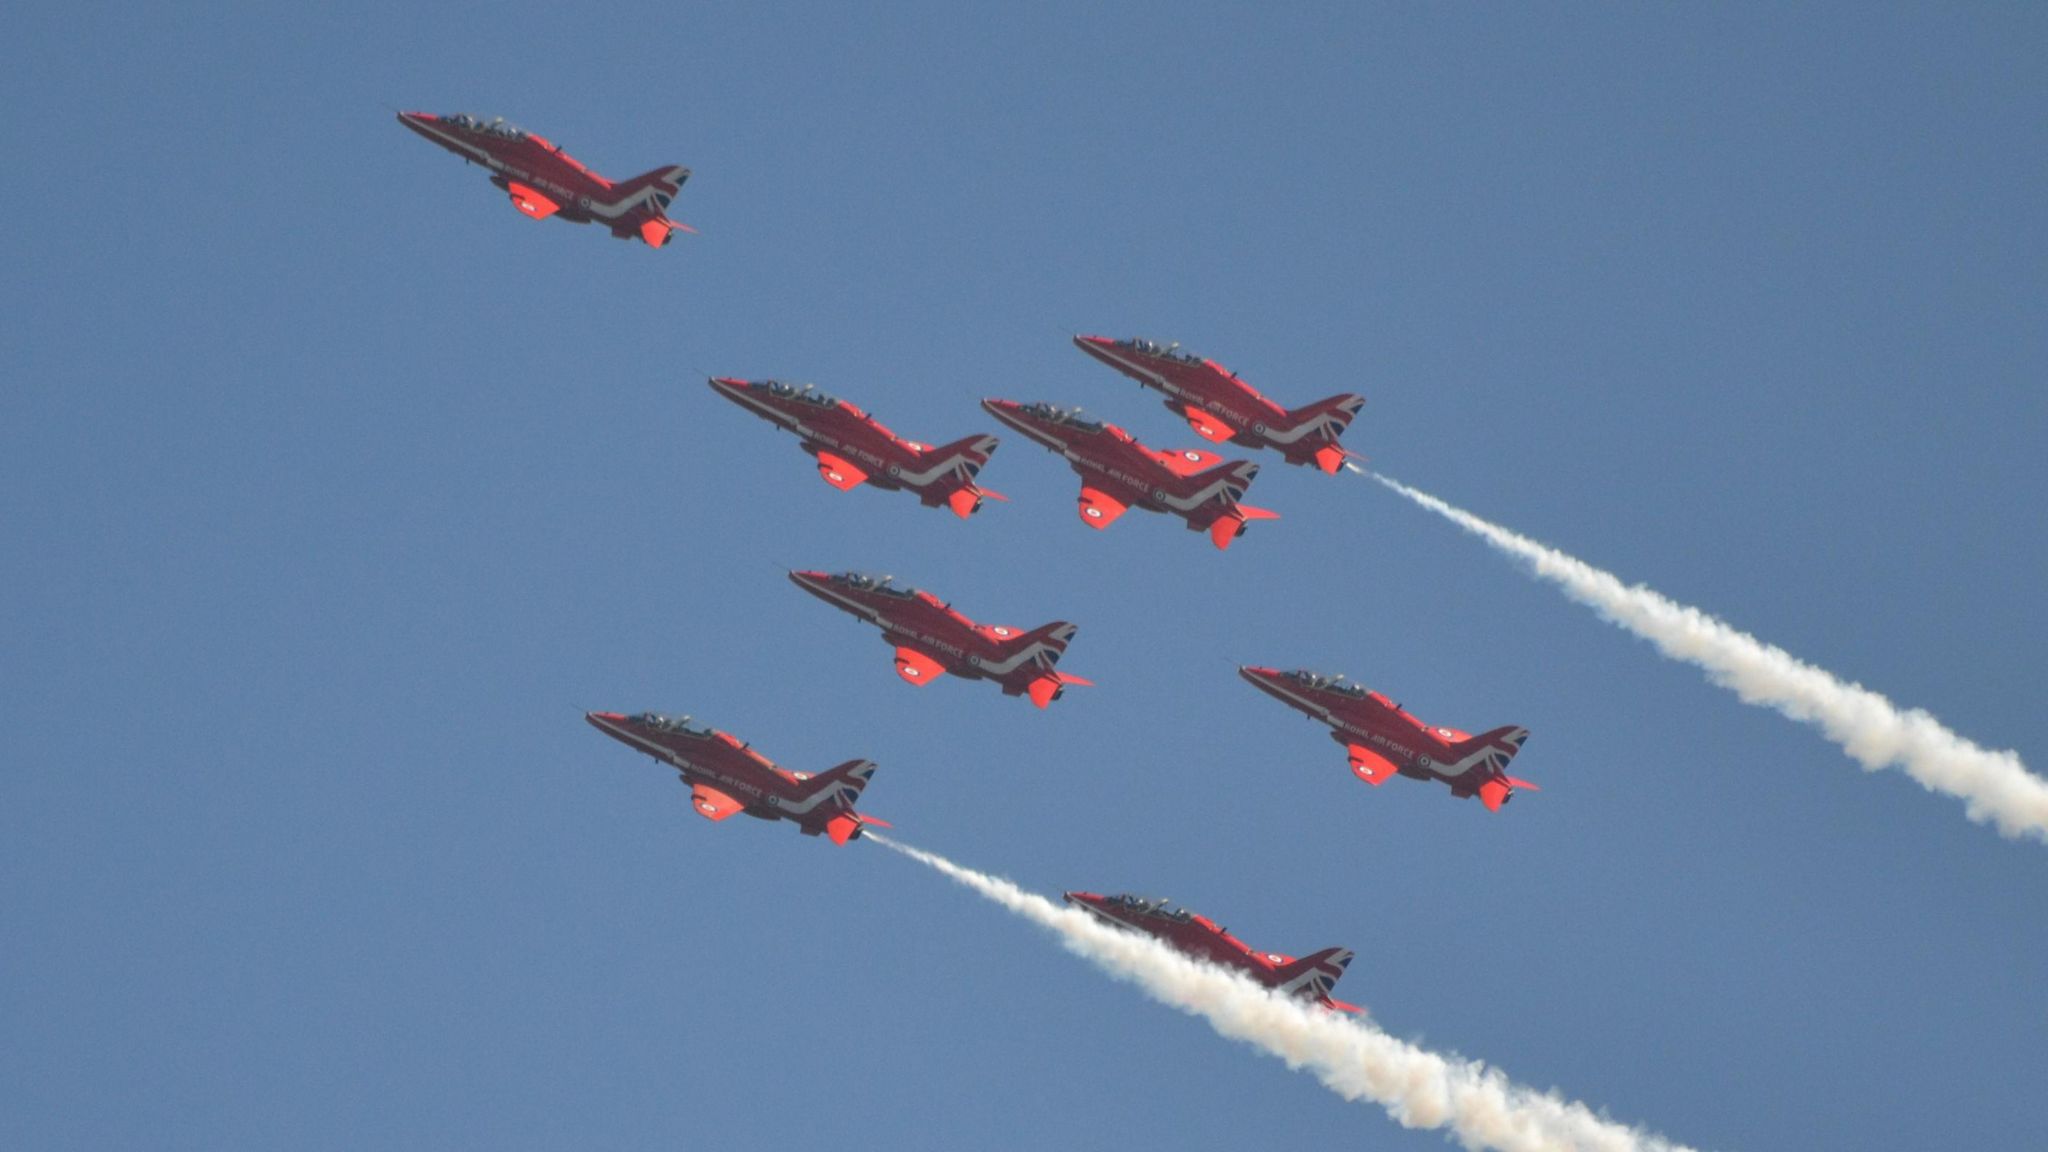 The Red Arrows in the Guernsey Air Display